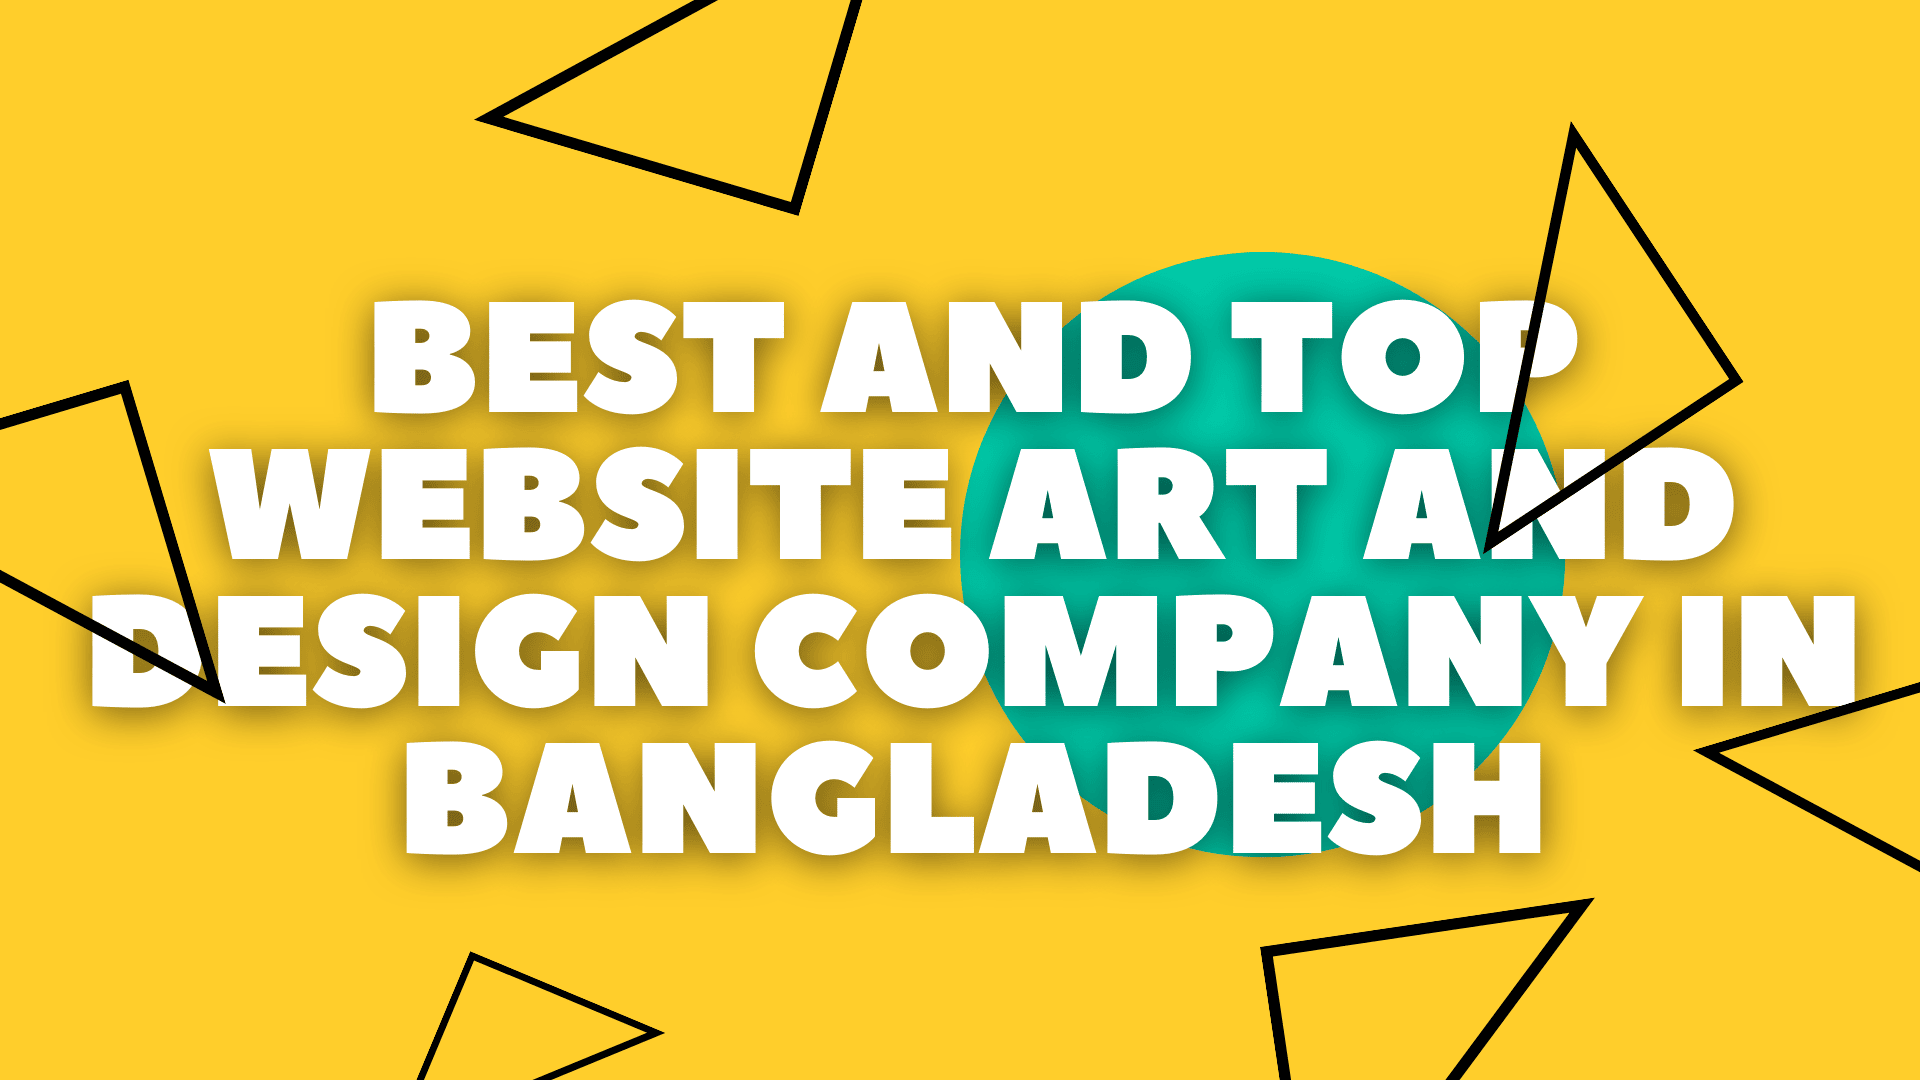 Best and Top Website Art and Design Company in Bangladesh